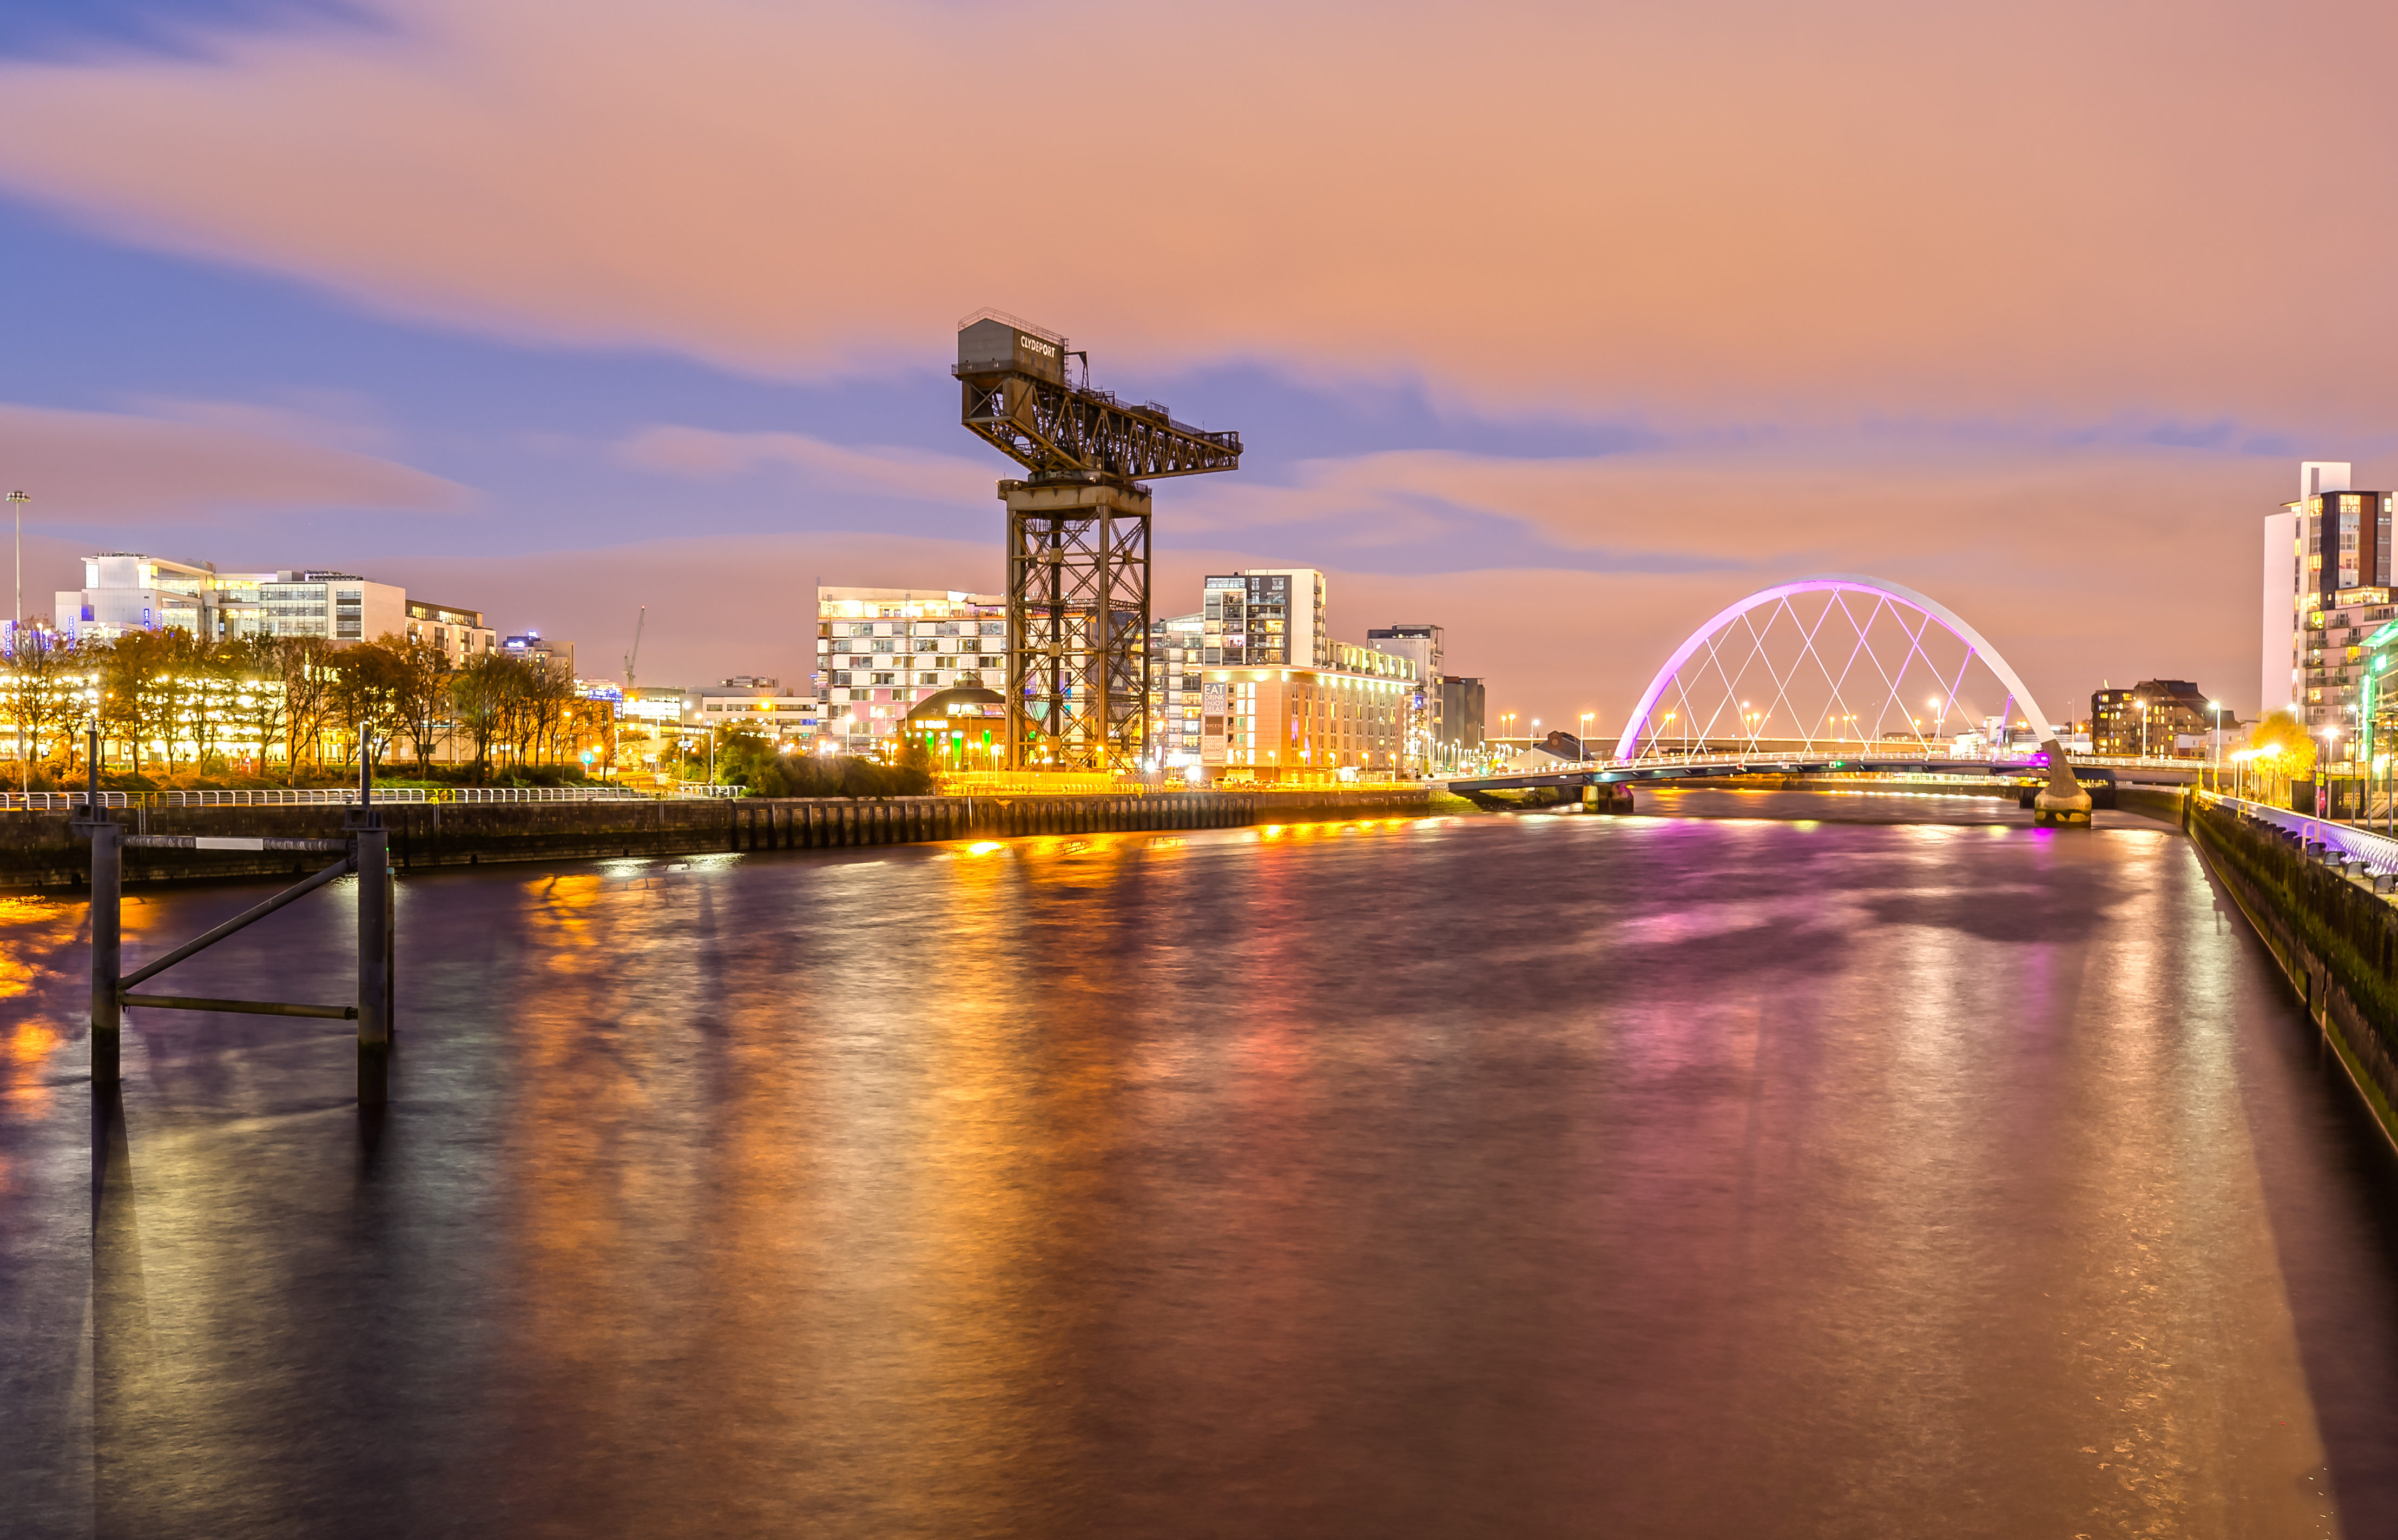 Glasgow skyline at night. The city has been found to be the best place to be a home seller currently as the market booms.